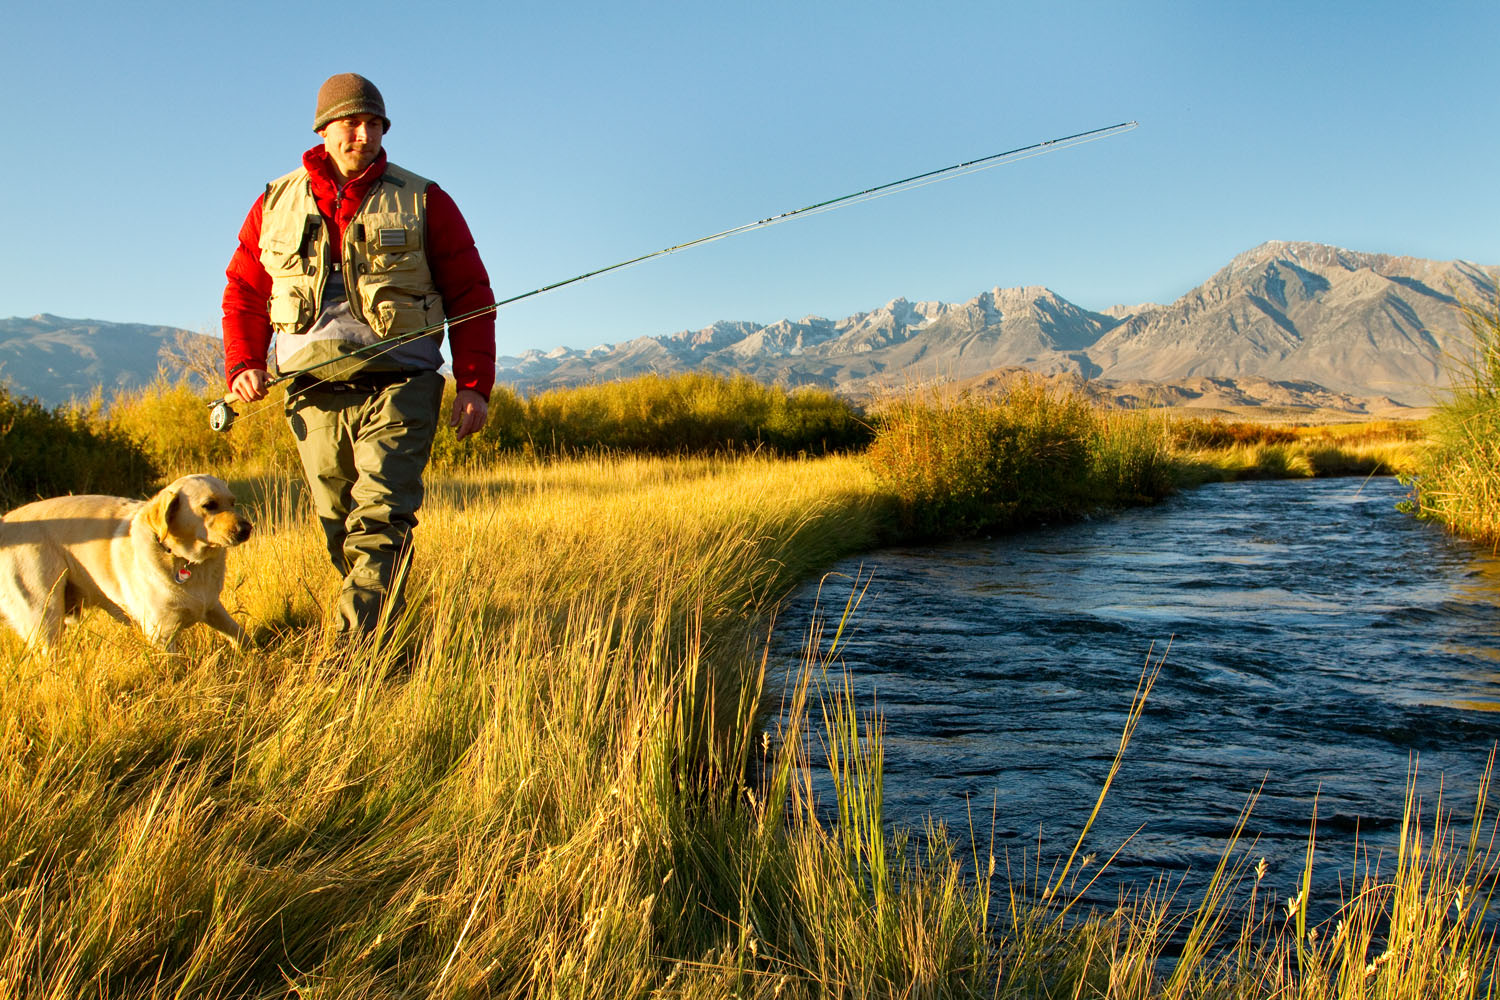  Lifestyle: Brian Harry fly fishing the Owens River at sunrise in late Autumn, Eastern Sierra, California 